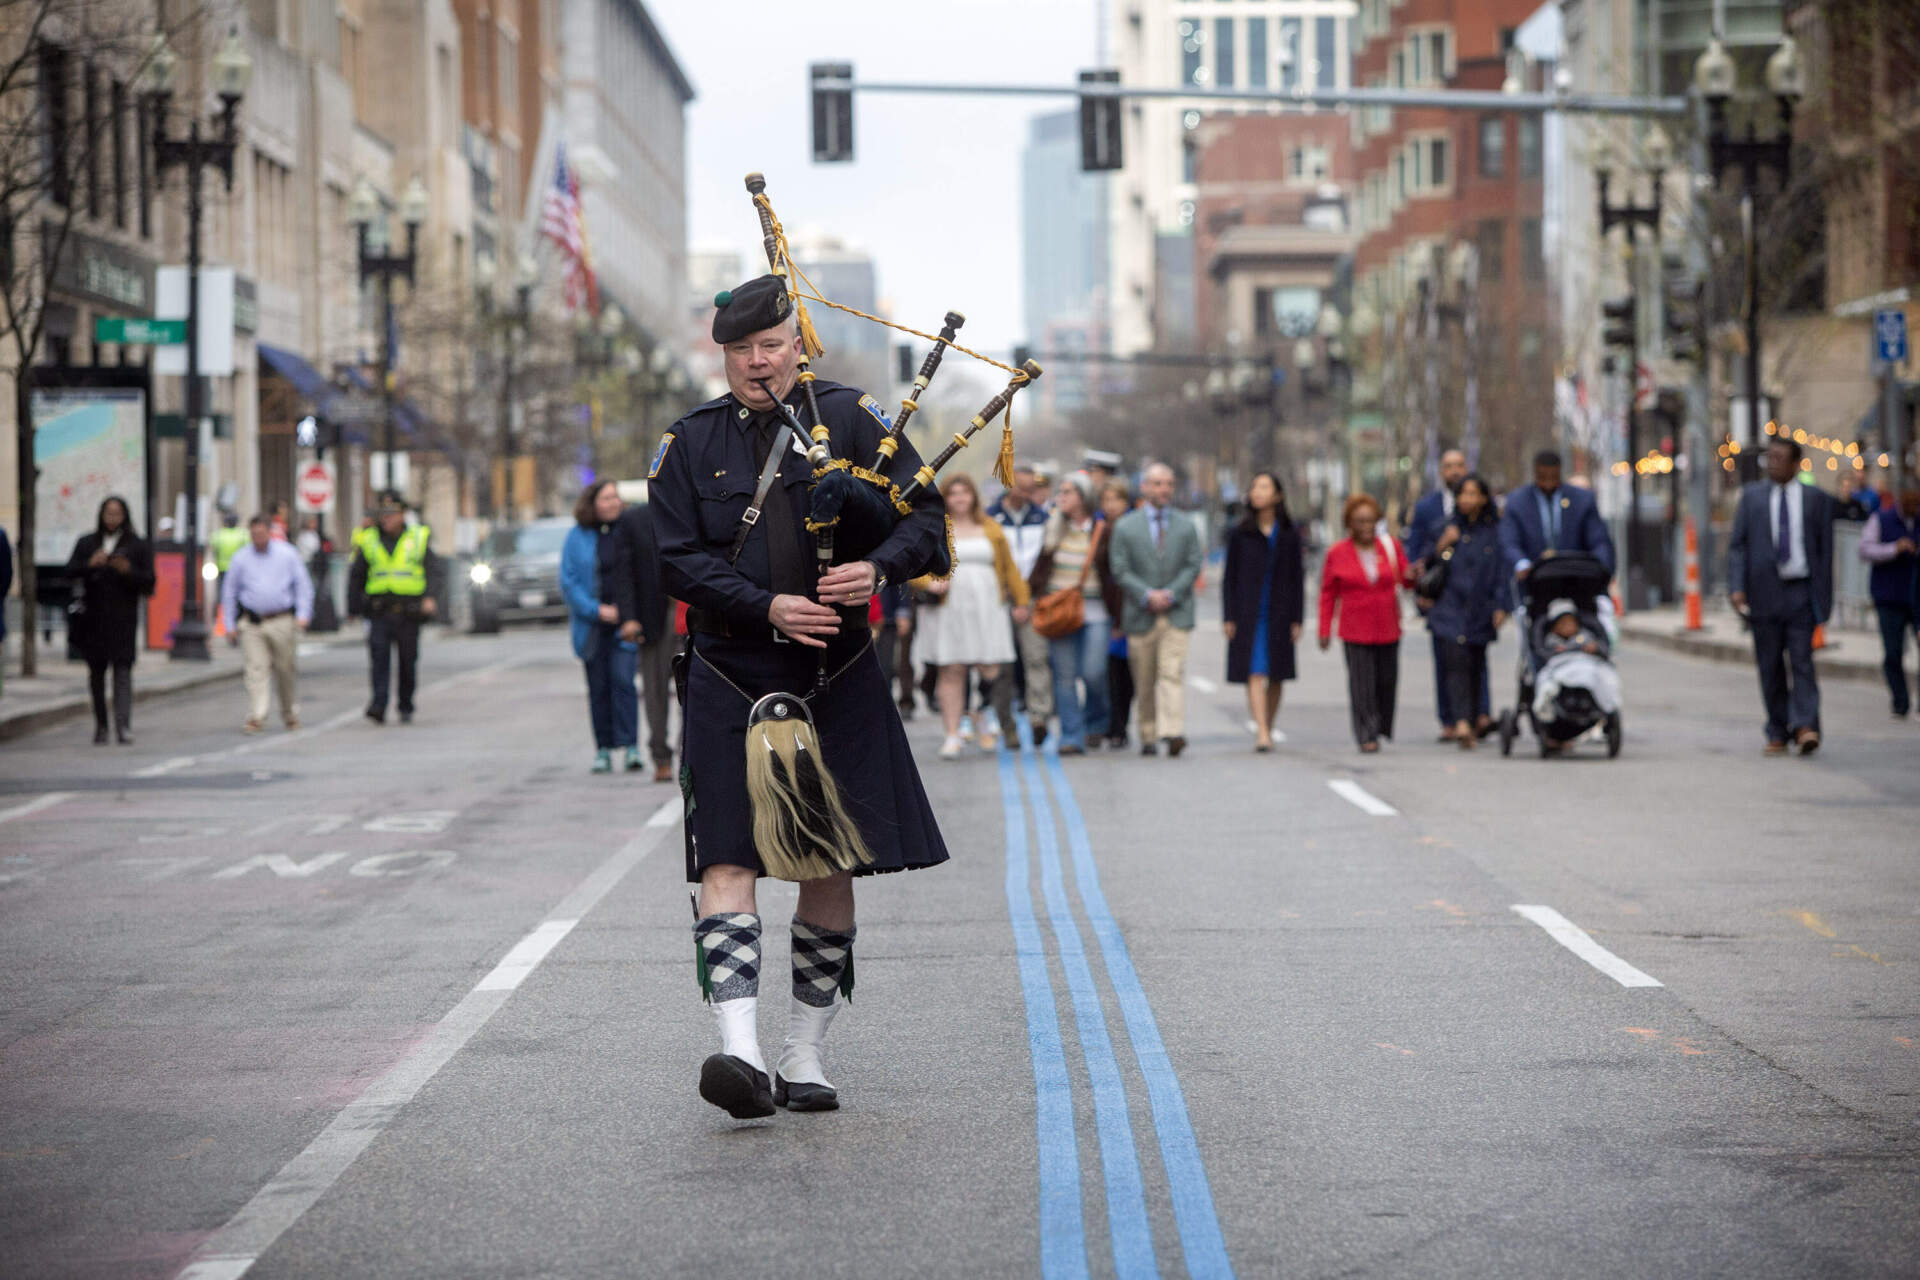 A piper leads Gov. Maura Healey and Boston Mayor Michelle Wu along Boylston Street at a remembrance with families who lost loved ones at the 2013 Boston Marathon bombings. (Robin Lubbock/WBUR)